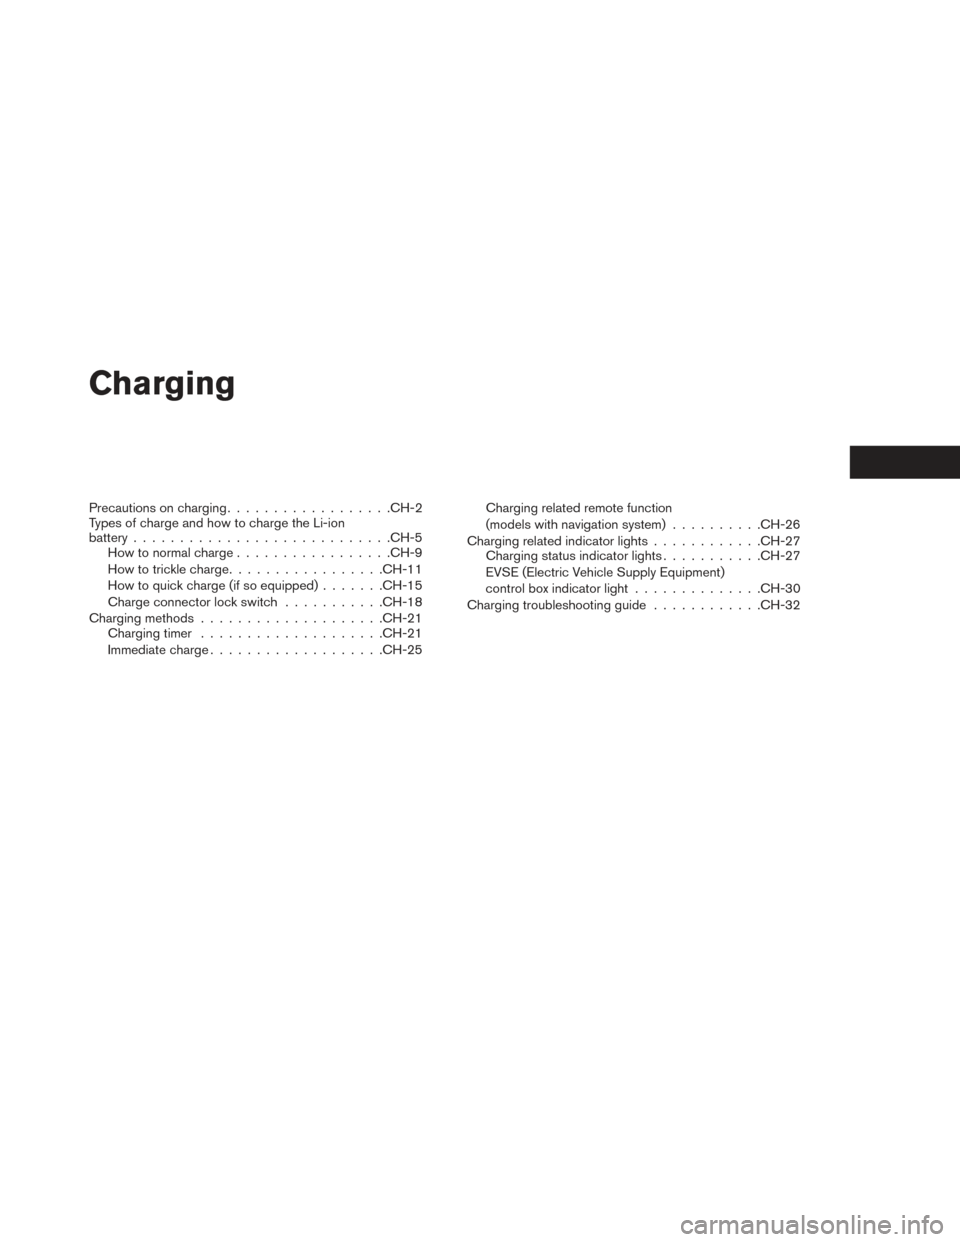 NISSAN LEAF 2017 1.G Service Manual Charging
Precautions on charging................. .CH-2
Types of charge and how to charge the Li-ion
battery ........................... .CH-5
How to normal charge ................ .CH-9
How to trickl